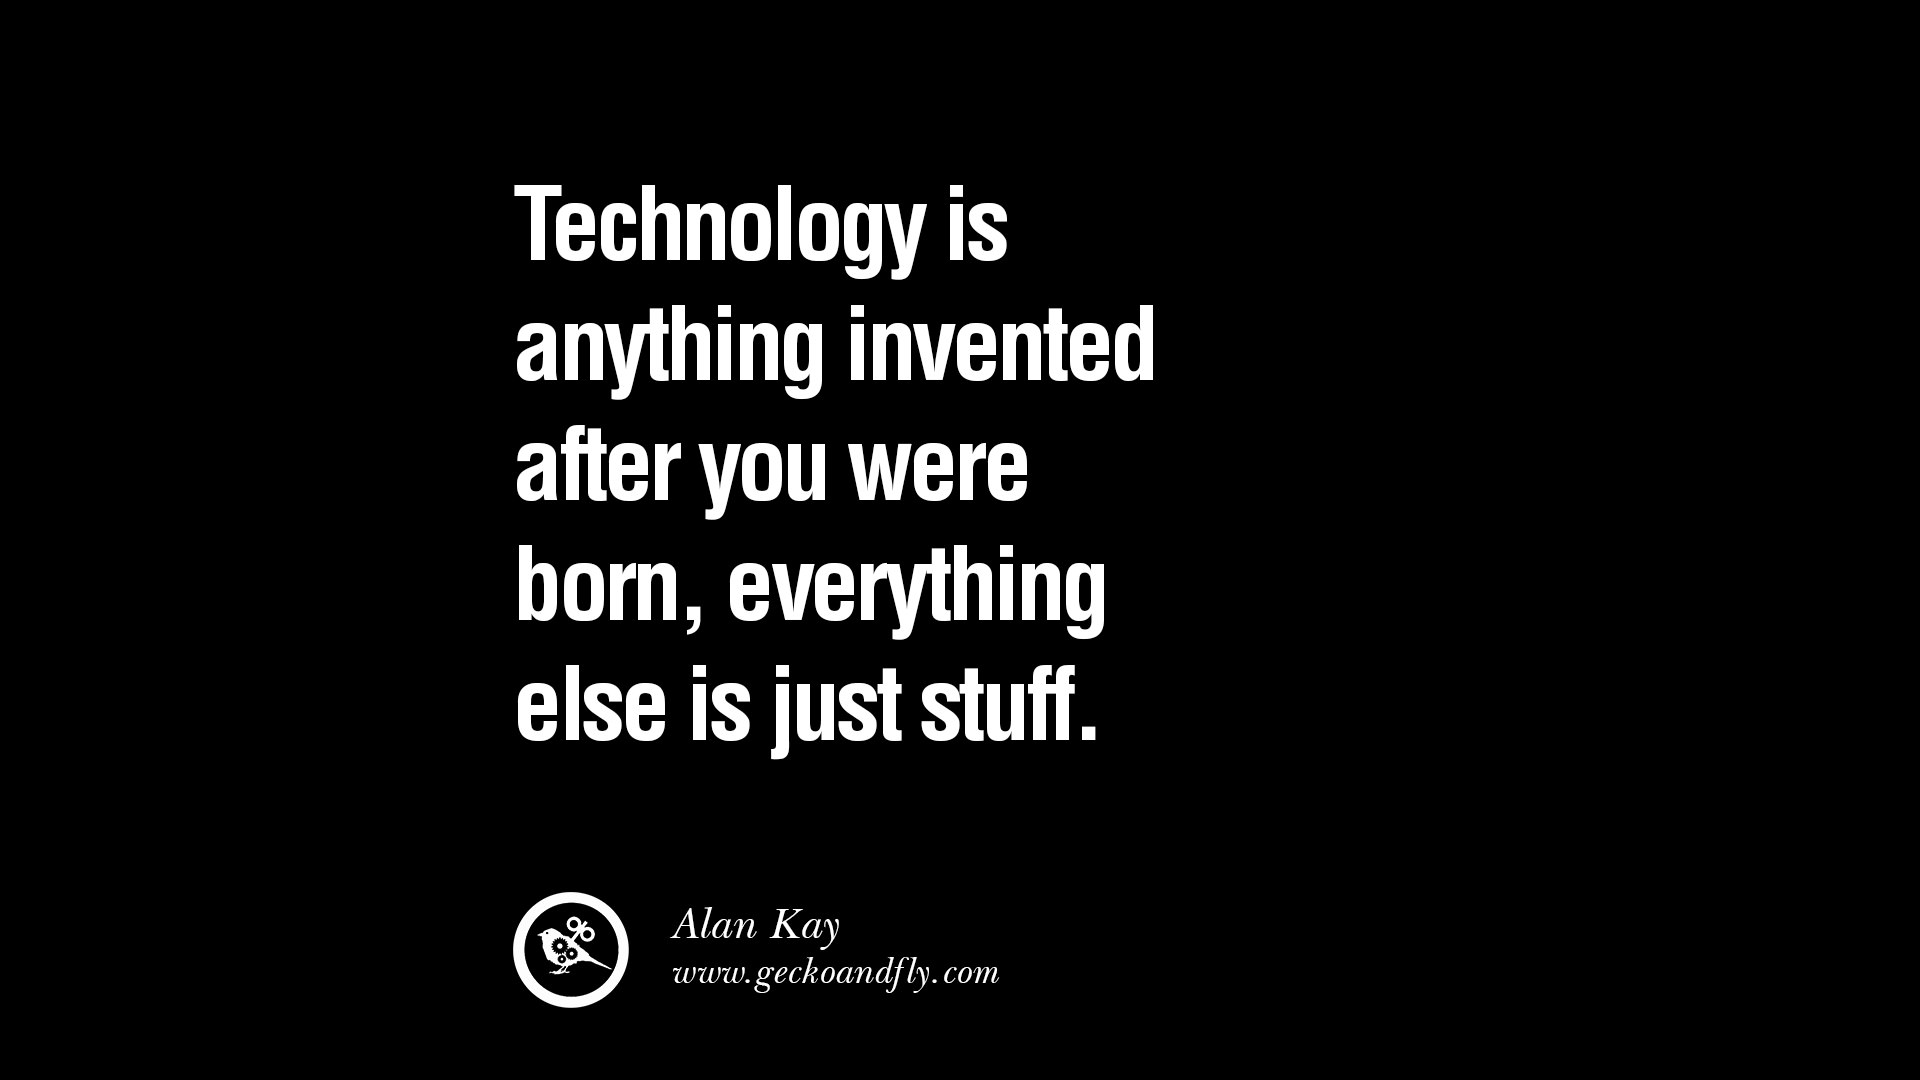 Quotes For Technology In School. QuotesGram